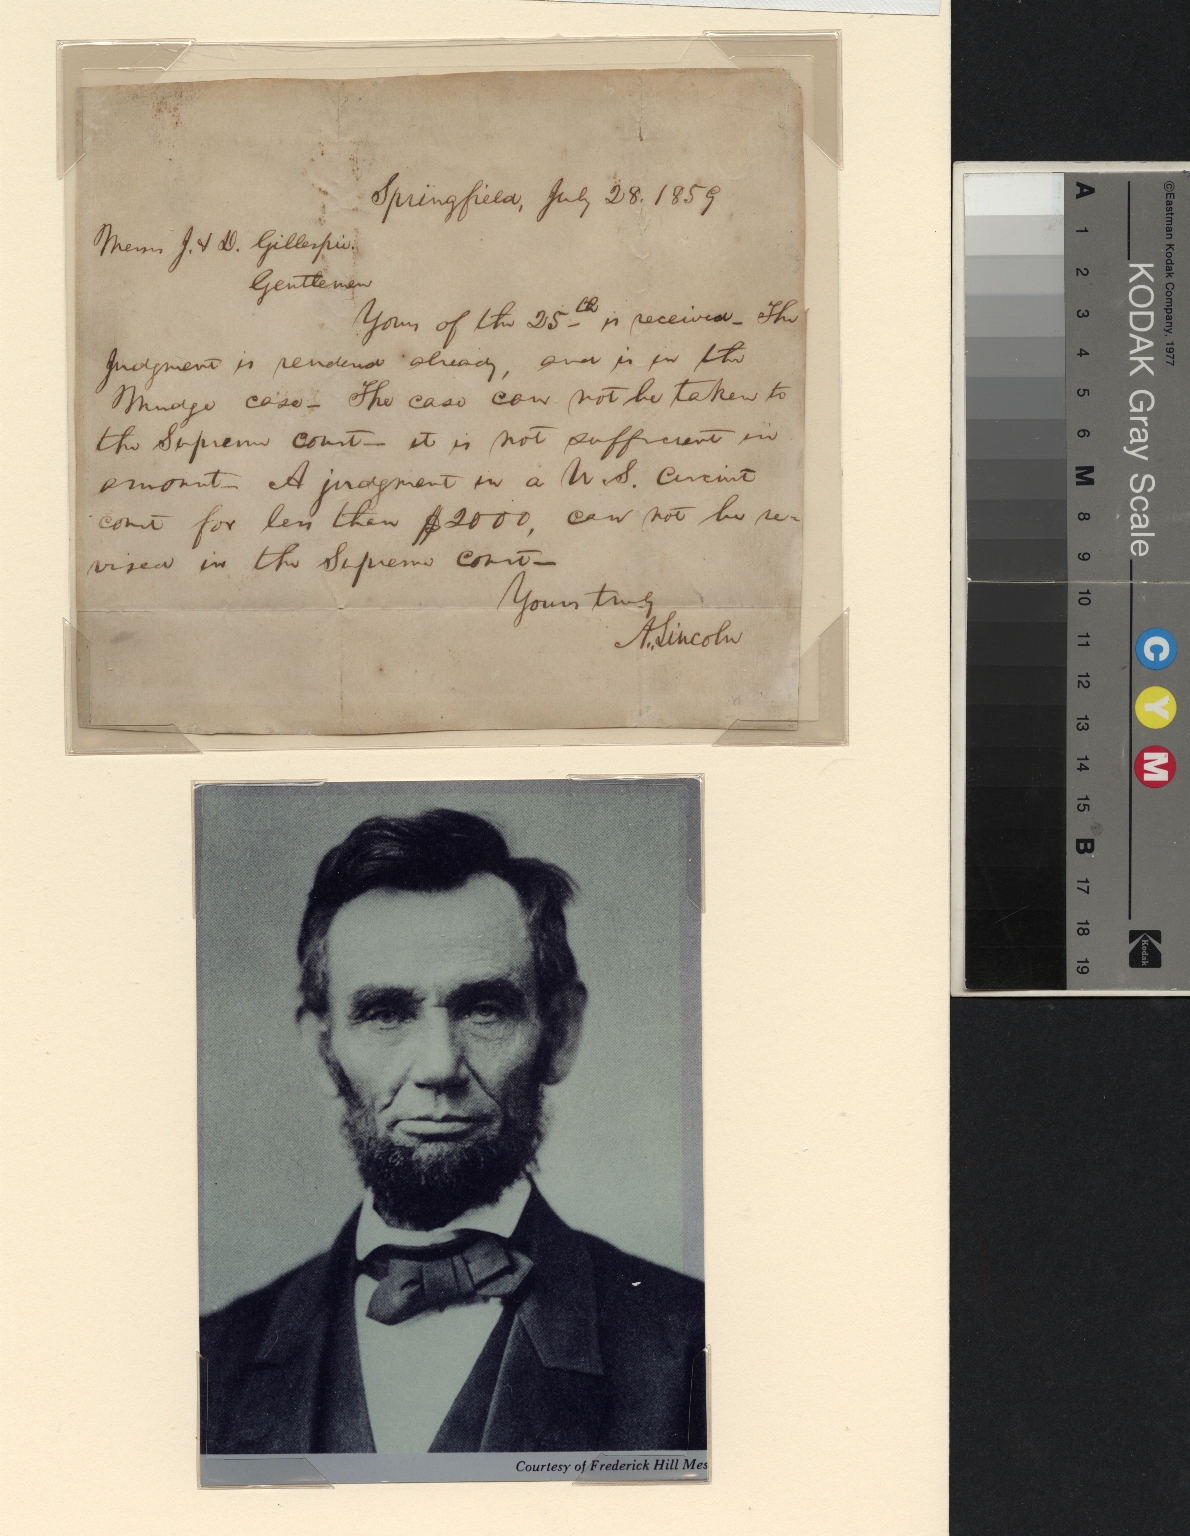 Abraham Lincoln letter to J. and D. Gillespie with photograph